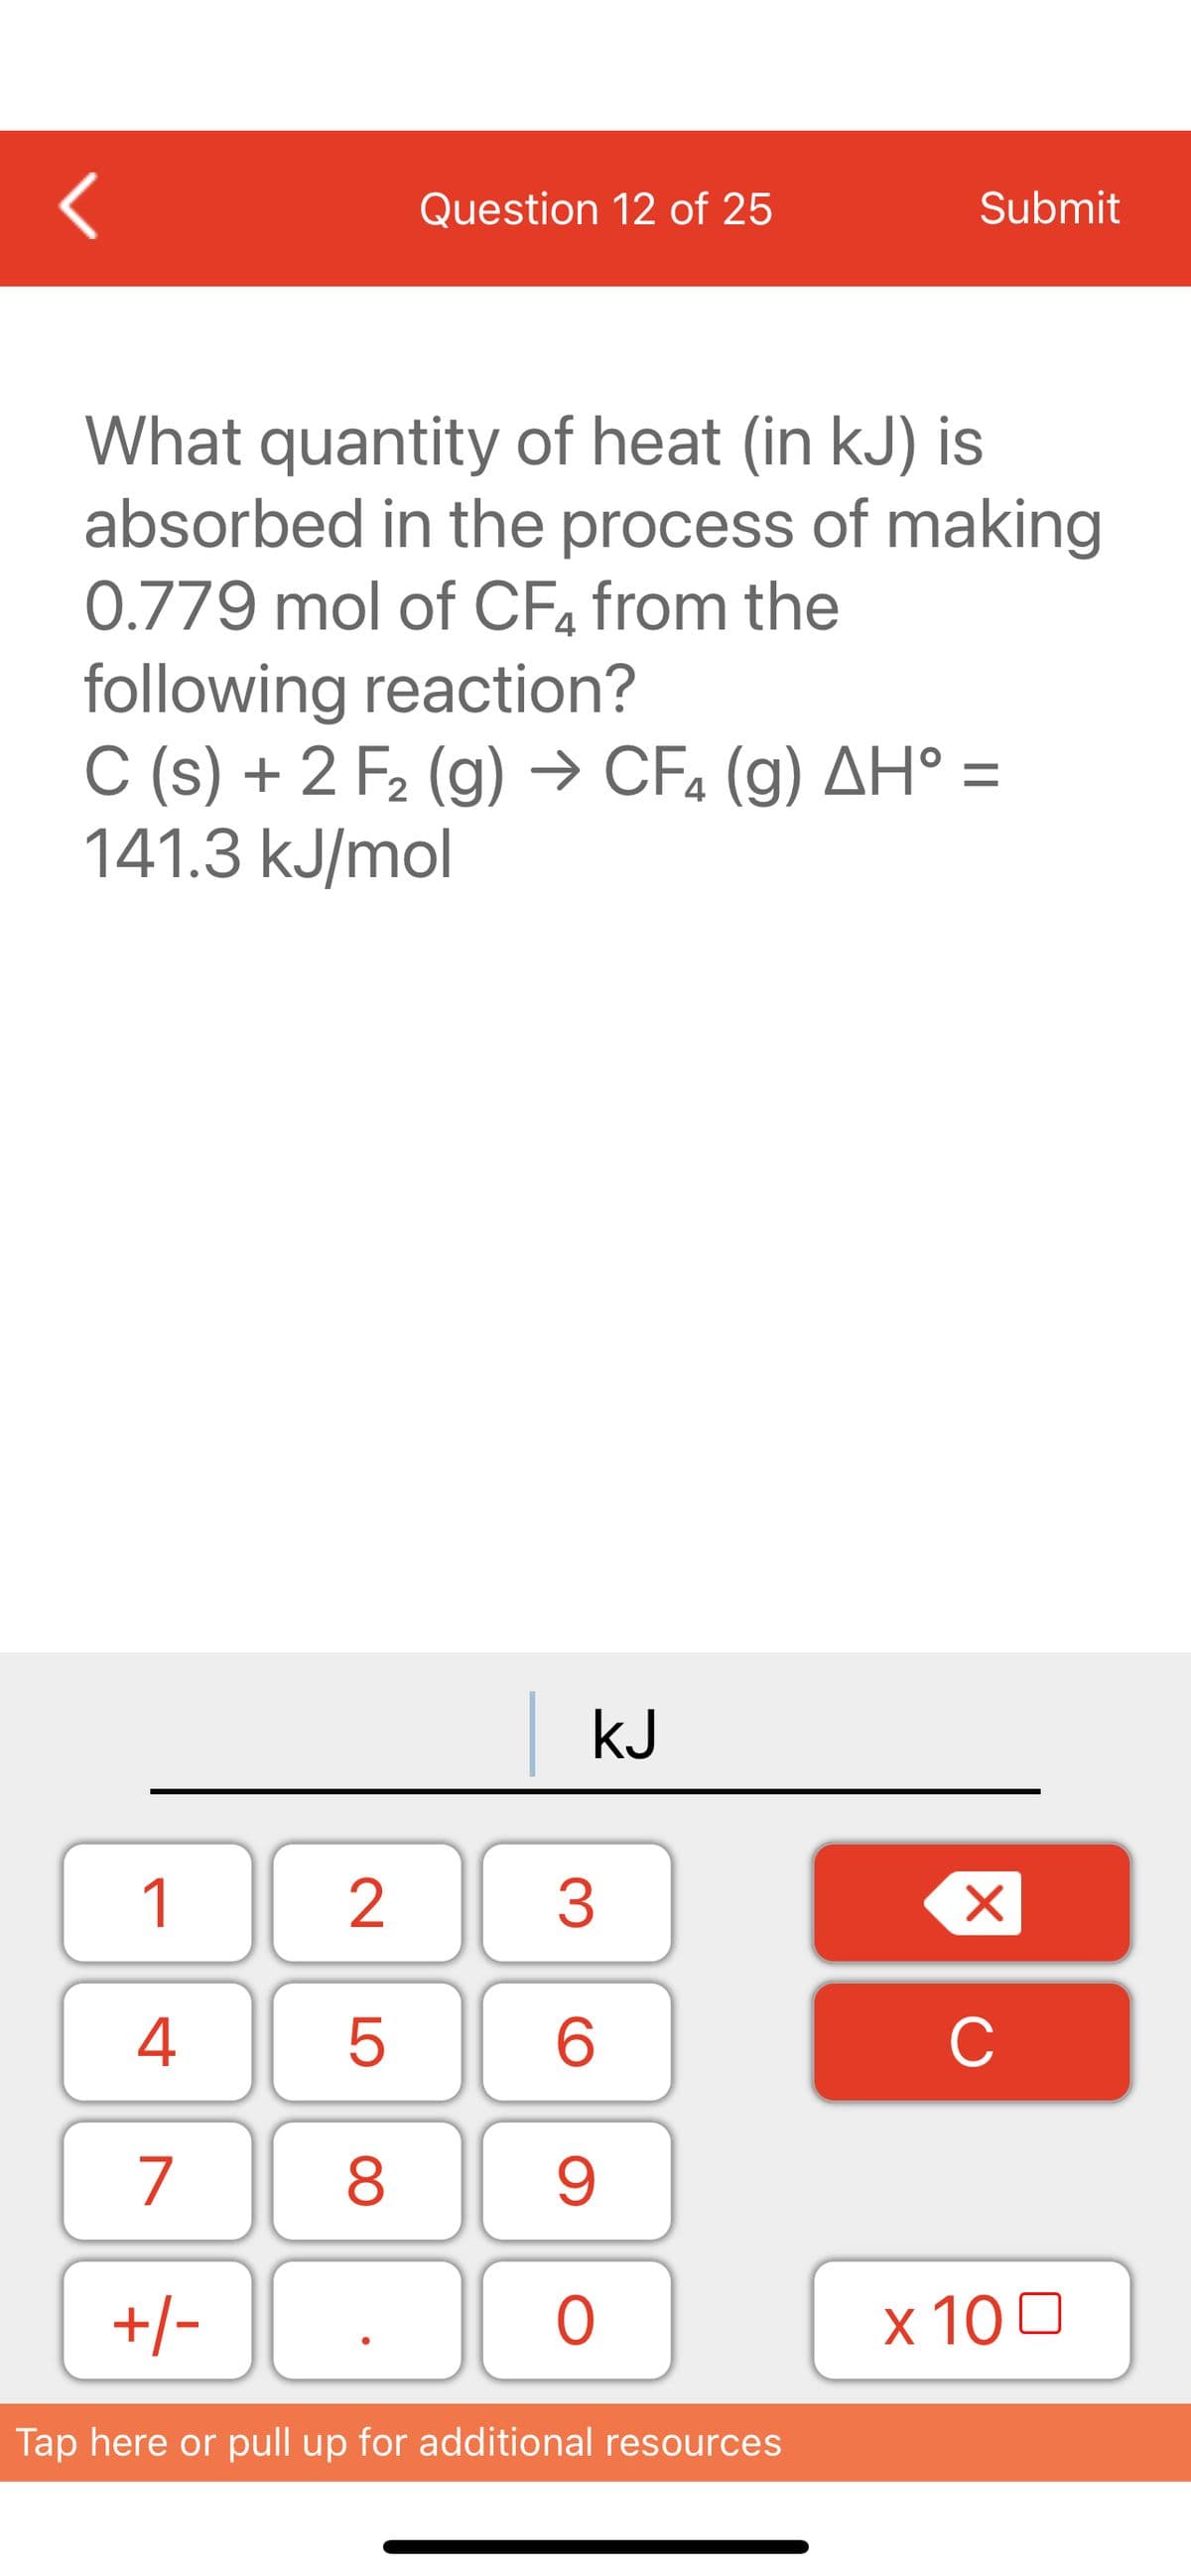 <
1
4
7
+/-
What quantity of heat (in kJ) is
absorbed in the process of making
0.779 mol of CF4 from the
following reaction?
C (s) + 2 F₂ (g) → CF4 (g) AH° =
141.3 kJ/mol
2
LO
Question 12 of 25
5
8
| KJ
3
6
9
O
Submit
Tap here or pull up for additional resources
X
C
x 100